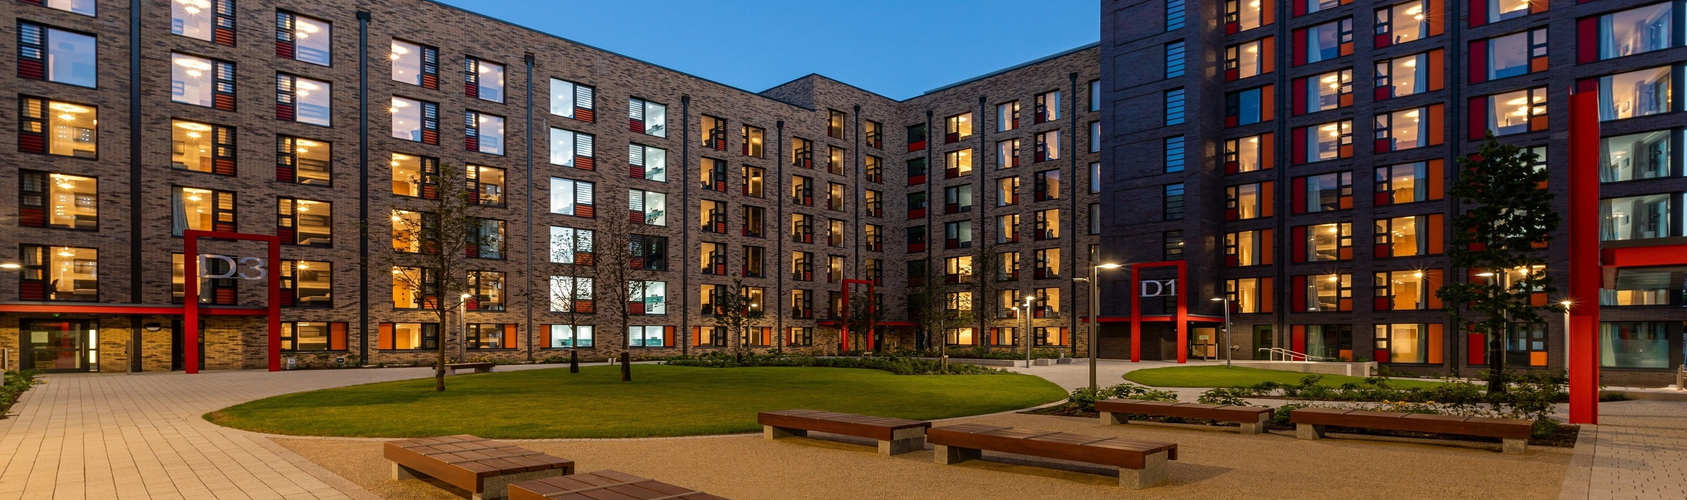 Exterior shot of the UCD Village accommodation with a night sky overhead